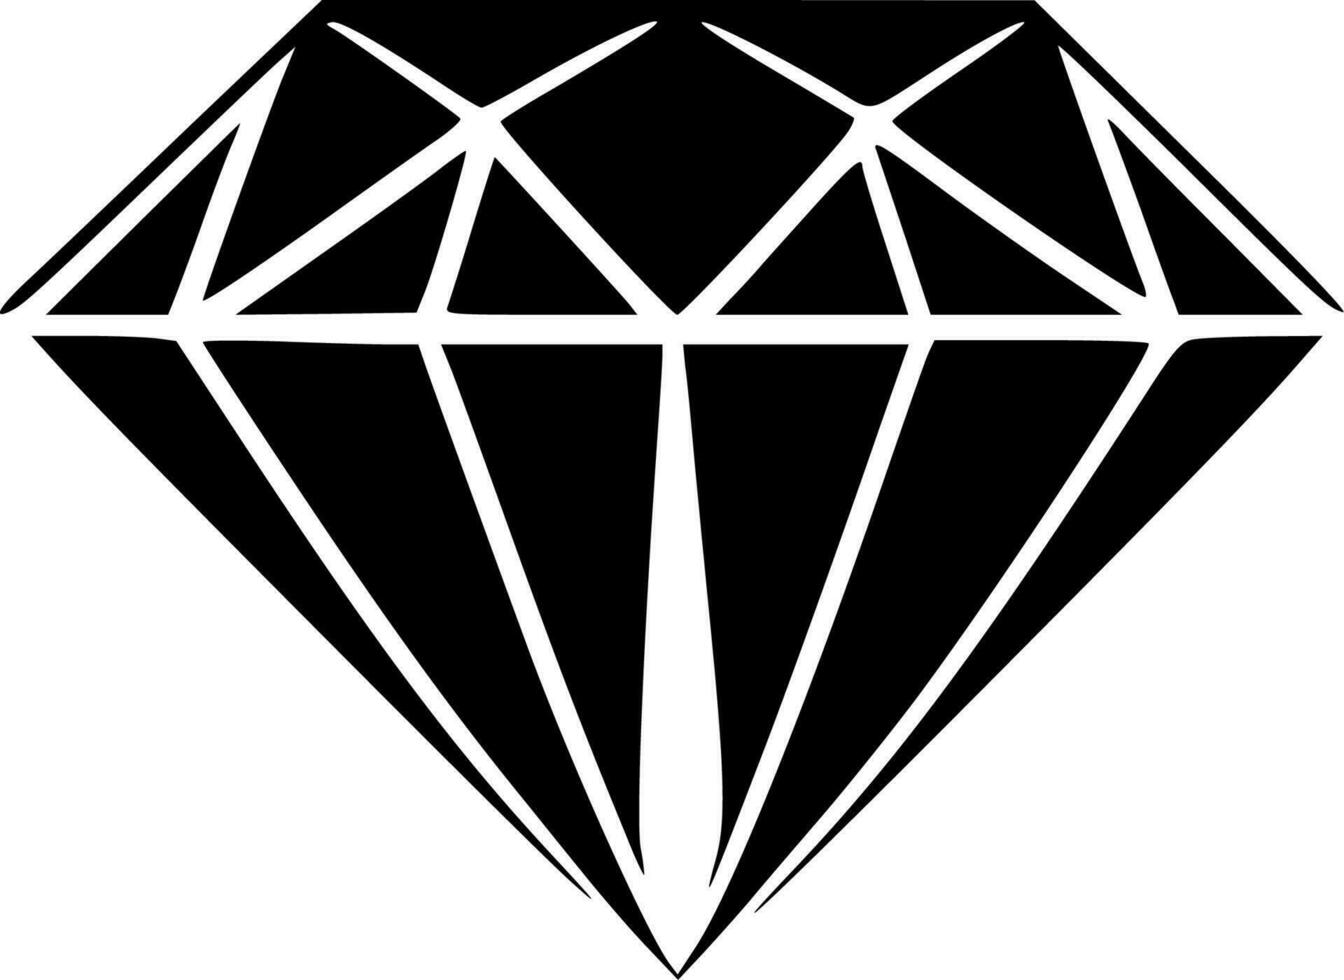 Diamond - Black and White Isolated Icon - Vector illustration